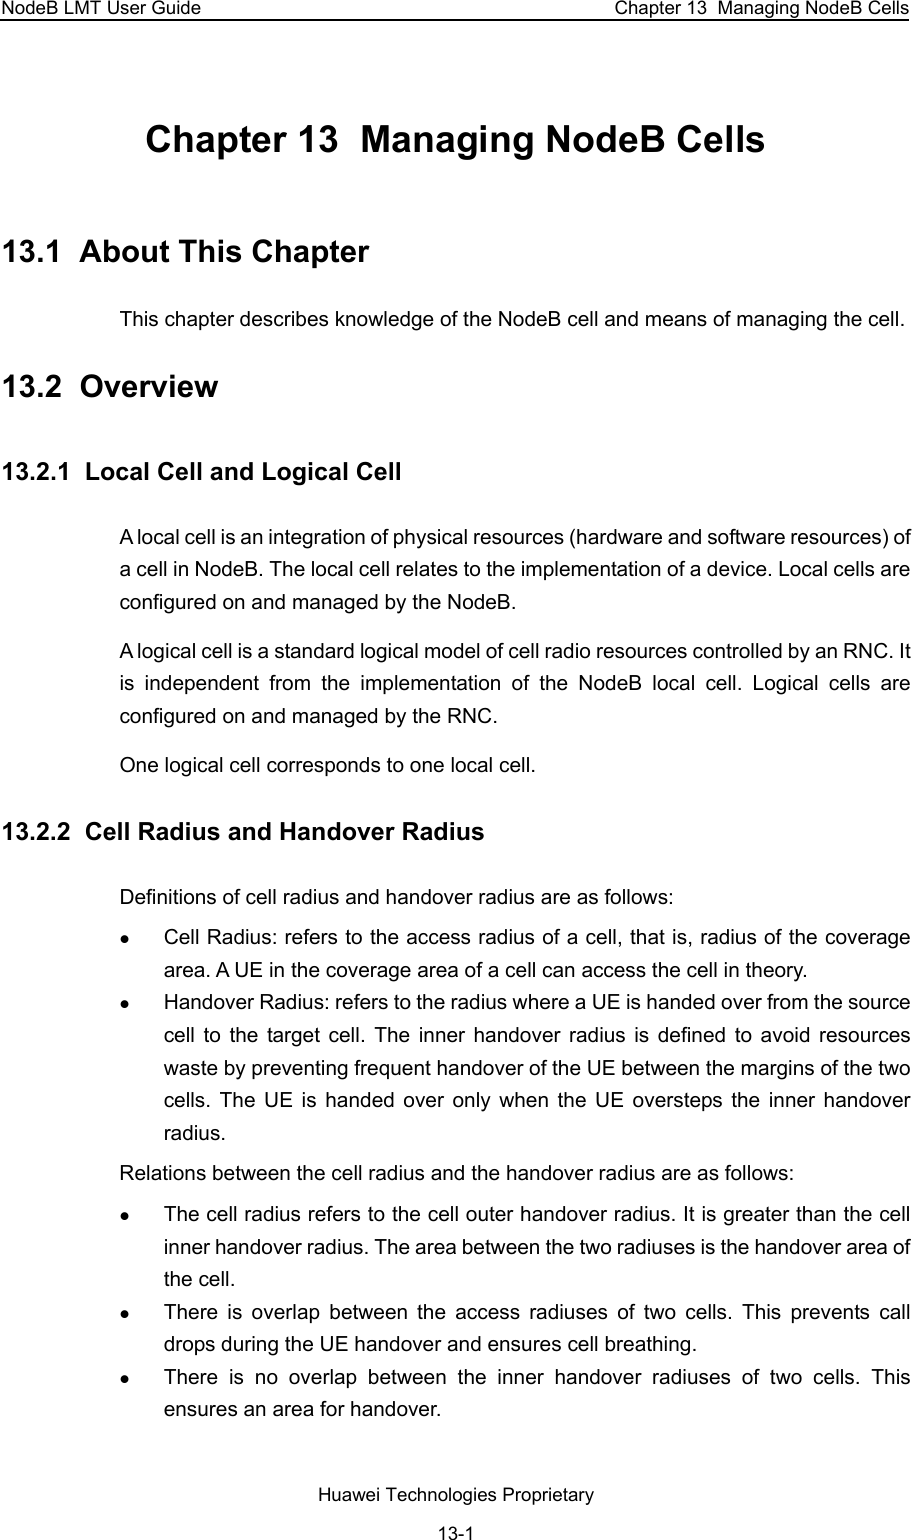 NodeB LMT User Guide  Chapter 13  Managing NodeB Cells Chapter 13  Managing NodeB Cells  13.1  About This Chapter This chapter describes knowledge of the NodeB cell and means of managing the cell.  13.2  Overview 13.2.1  Local Cell and Logical Cell  A local cell is an integration of physical resources (hardware and software resources) of a cell in NodeB. The local cell relates to the implementation of a device. Local cells are configured on and managed by the NodeB. A logical cell is a standard logical model of cell radio resources controlled by an RNC. It is independent from the implementation of the NodeB local cell. Logical cells are configured on and managed by the RNC. One logical cell corresponds to one local cell. 13.2.2  Cell Radius and Handover Radius Definitions of cell radius and handover radius are as follows:  z Cell Radius: refers to the access radius of a cell, that is, radius of the coverage area. A UE in the coverage area of a cell can access the cell in theory. z Handover Radius: refers to the radius where a UE is handed over from the source cell to the target cell. The inner handover radius is defined to avoid resources waste by preventing frequent handover of the UE between the margins of the two cells. The UE is handed over only when the UE oversteps the inner handover radius. Relations between the cell radius and the handover radius are as follows:  z The cell radius refers to the cell outer handover radius. It is greater than the cell inner handover radius. The area between the two radiuses is the handover area of the cell.  z There is overlap between the access radiuses of two cells. This prevents call drops during the UE handover and ensures cell breathing. z There is no overlap between the inner handover radiuses of two cells. This ensures an area for handover. Huawei Technologies Proprietary 13-1 